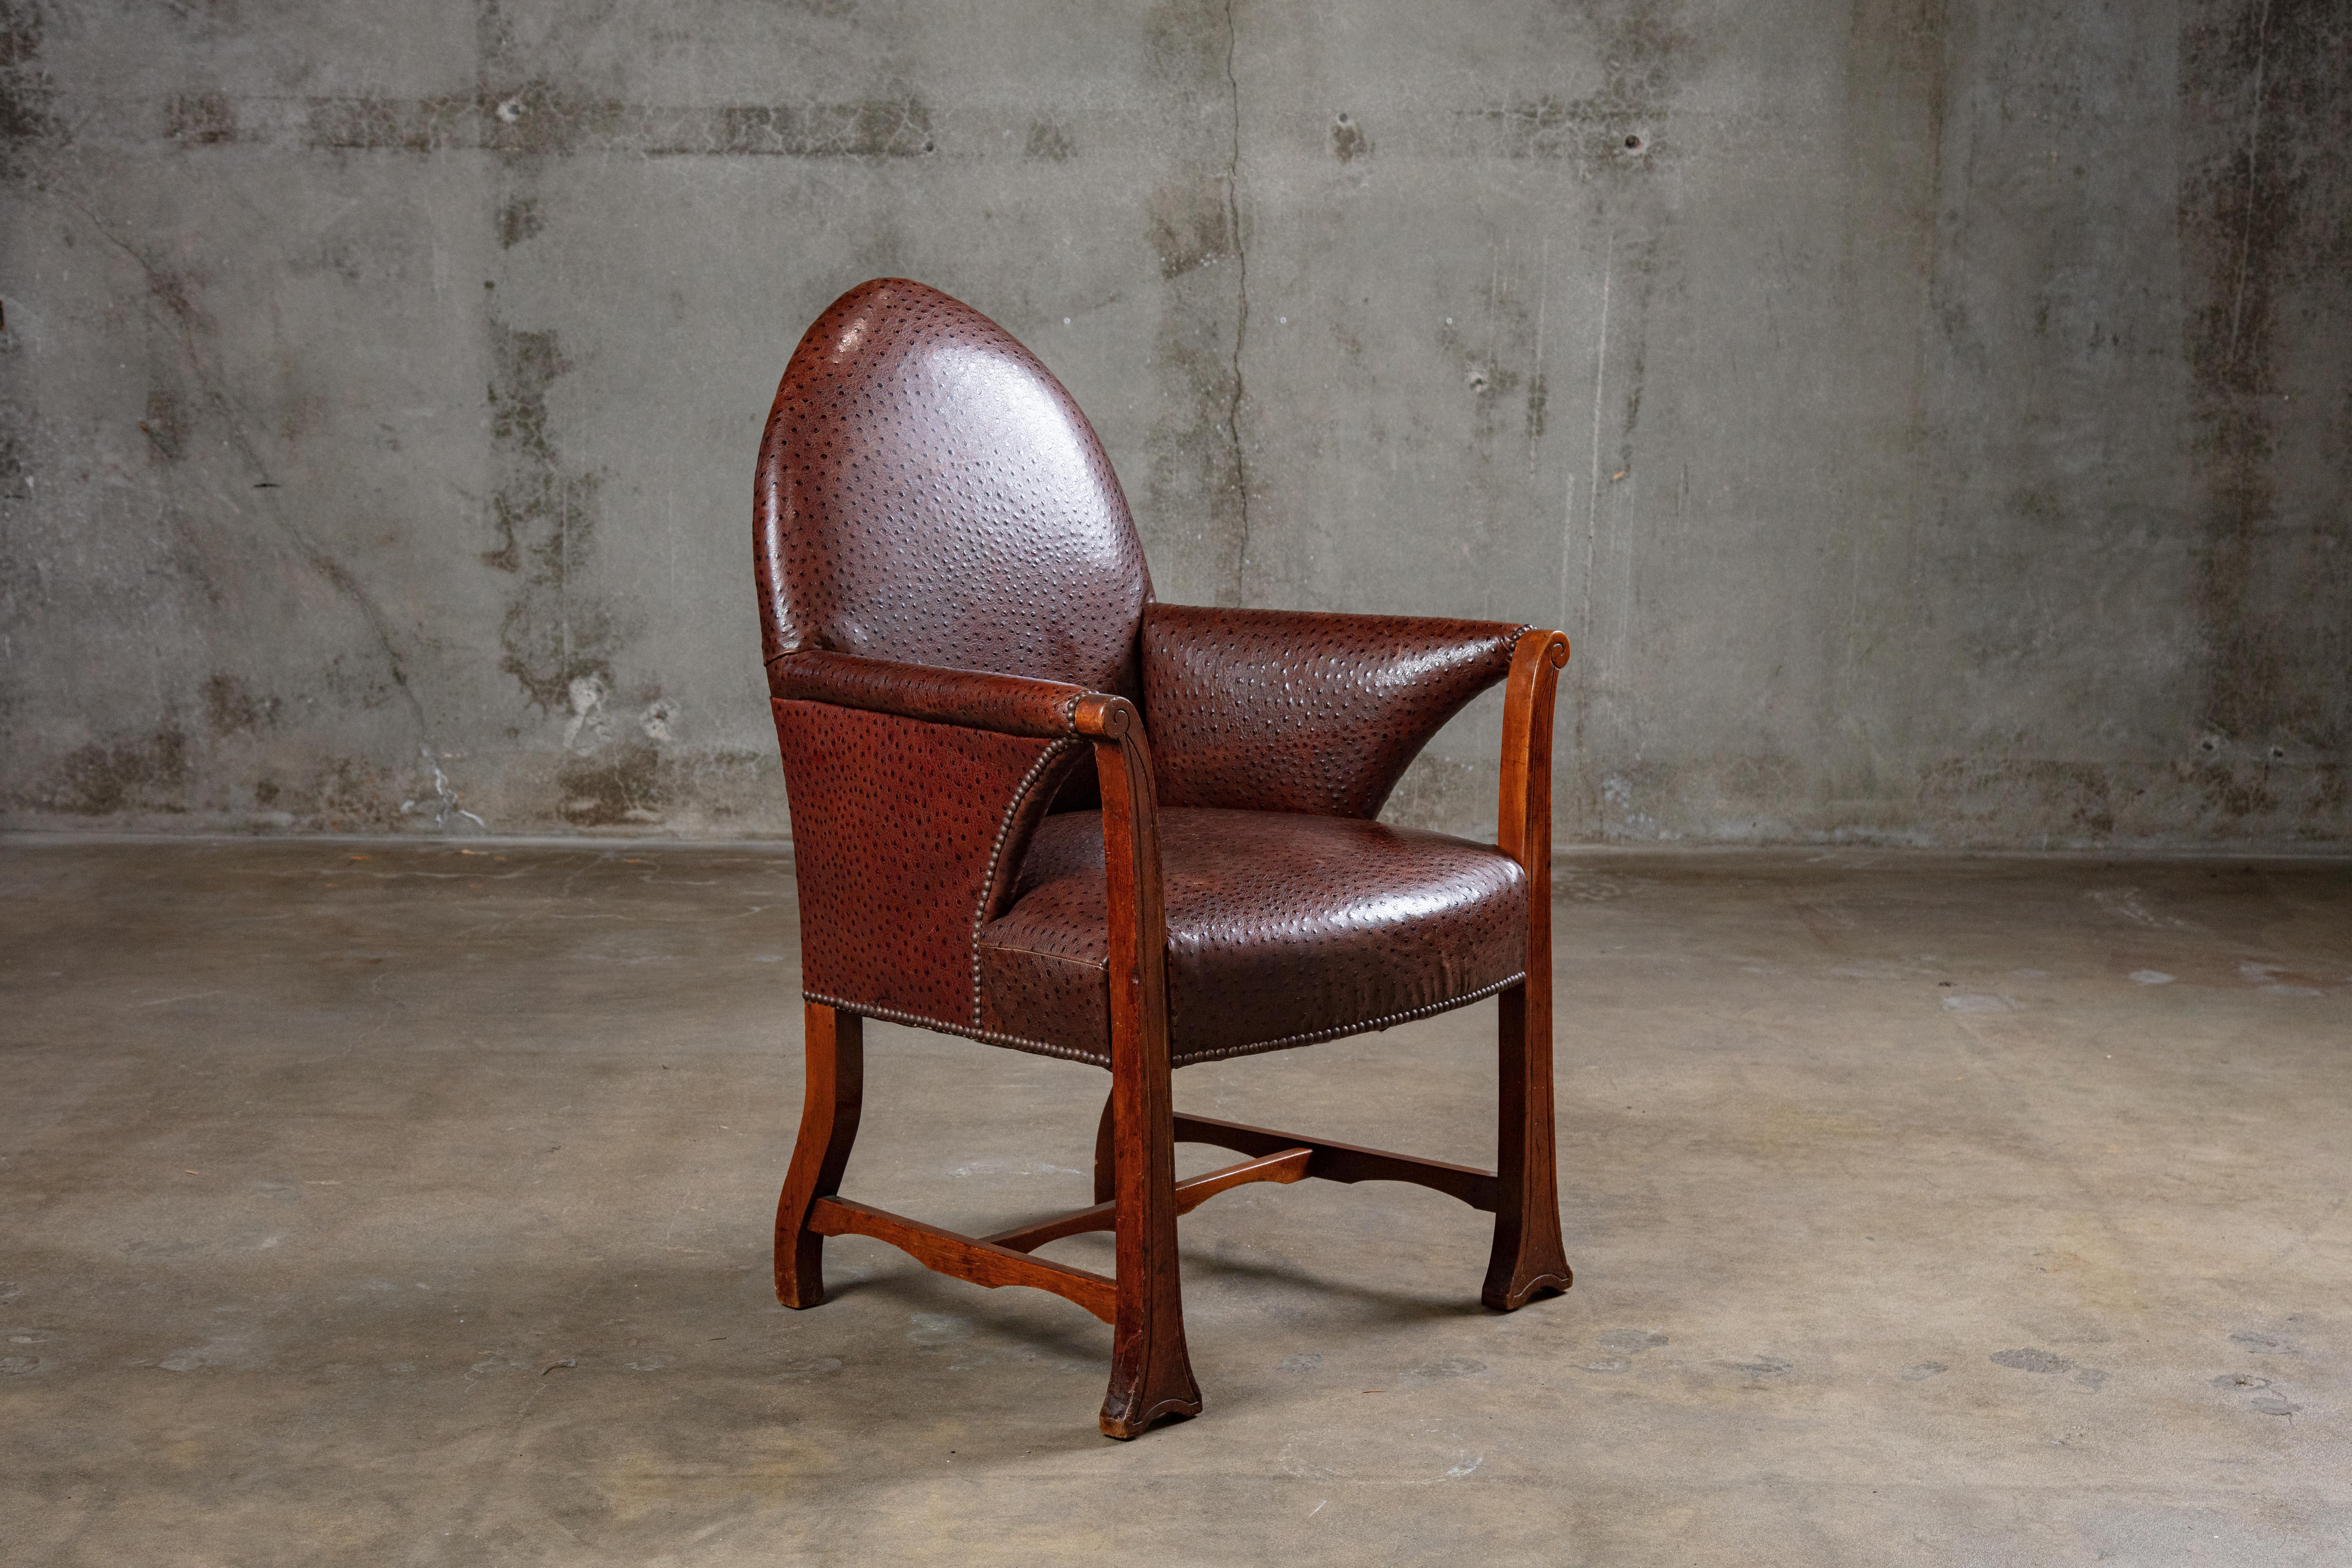 Art Deco brown leather upholstered mahogany armchair, 1920s.